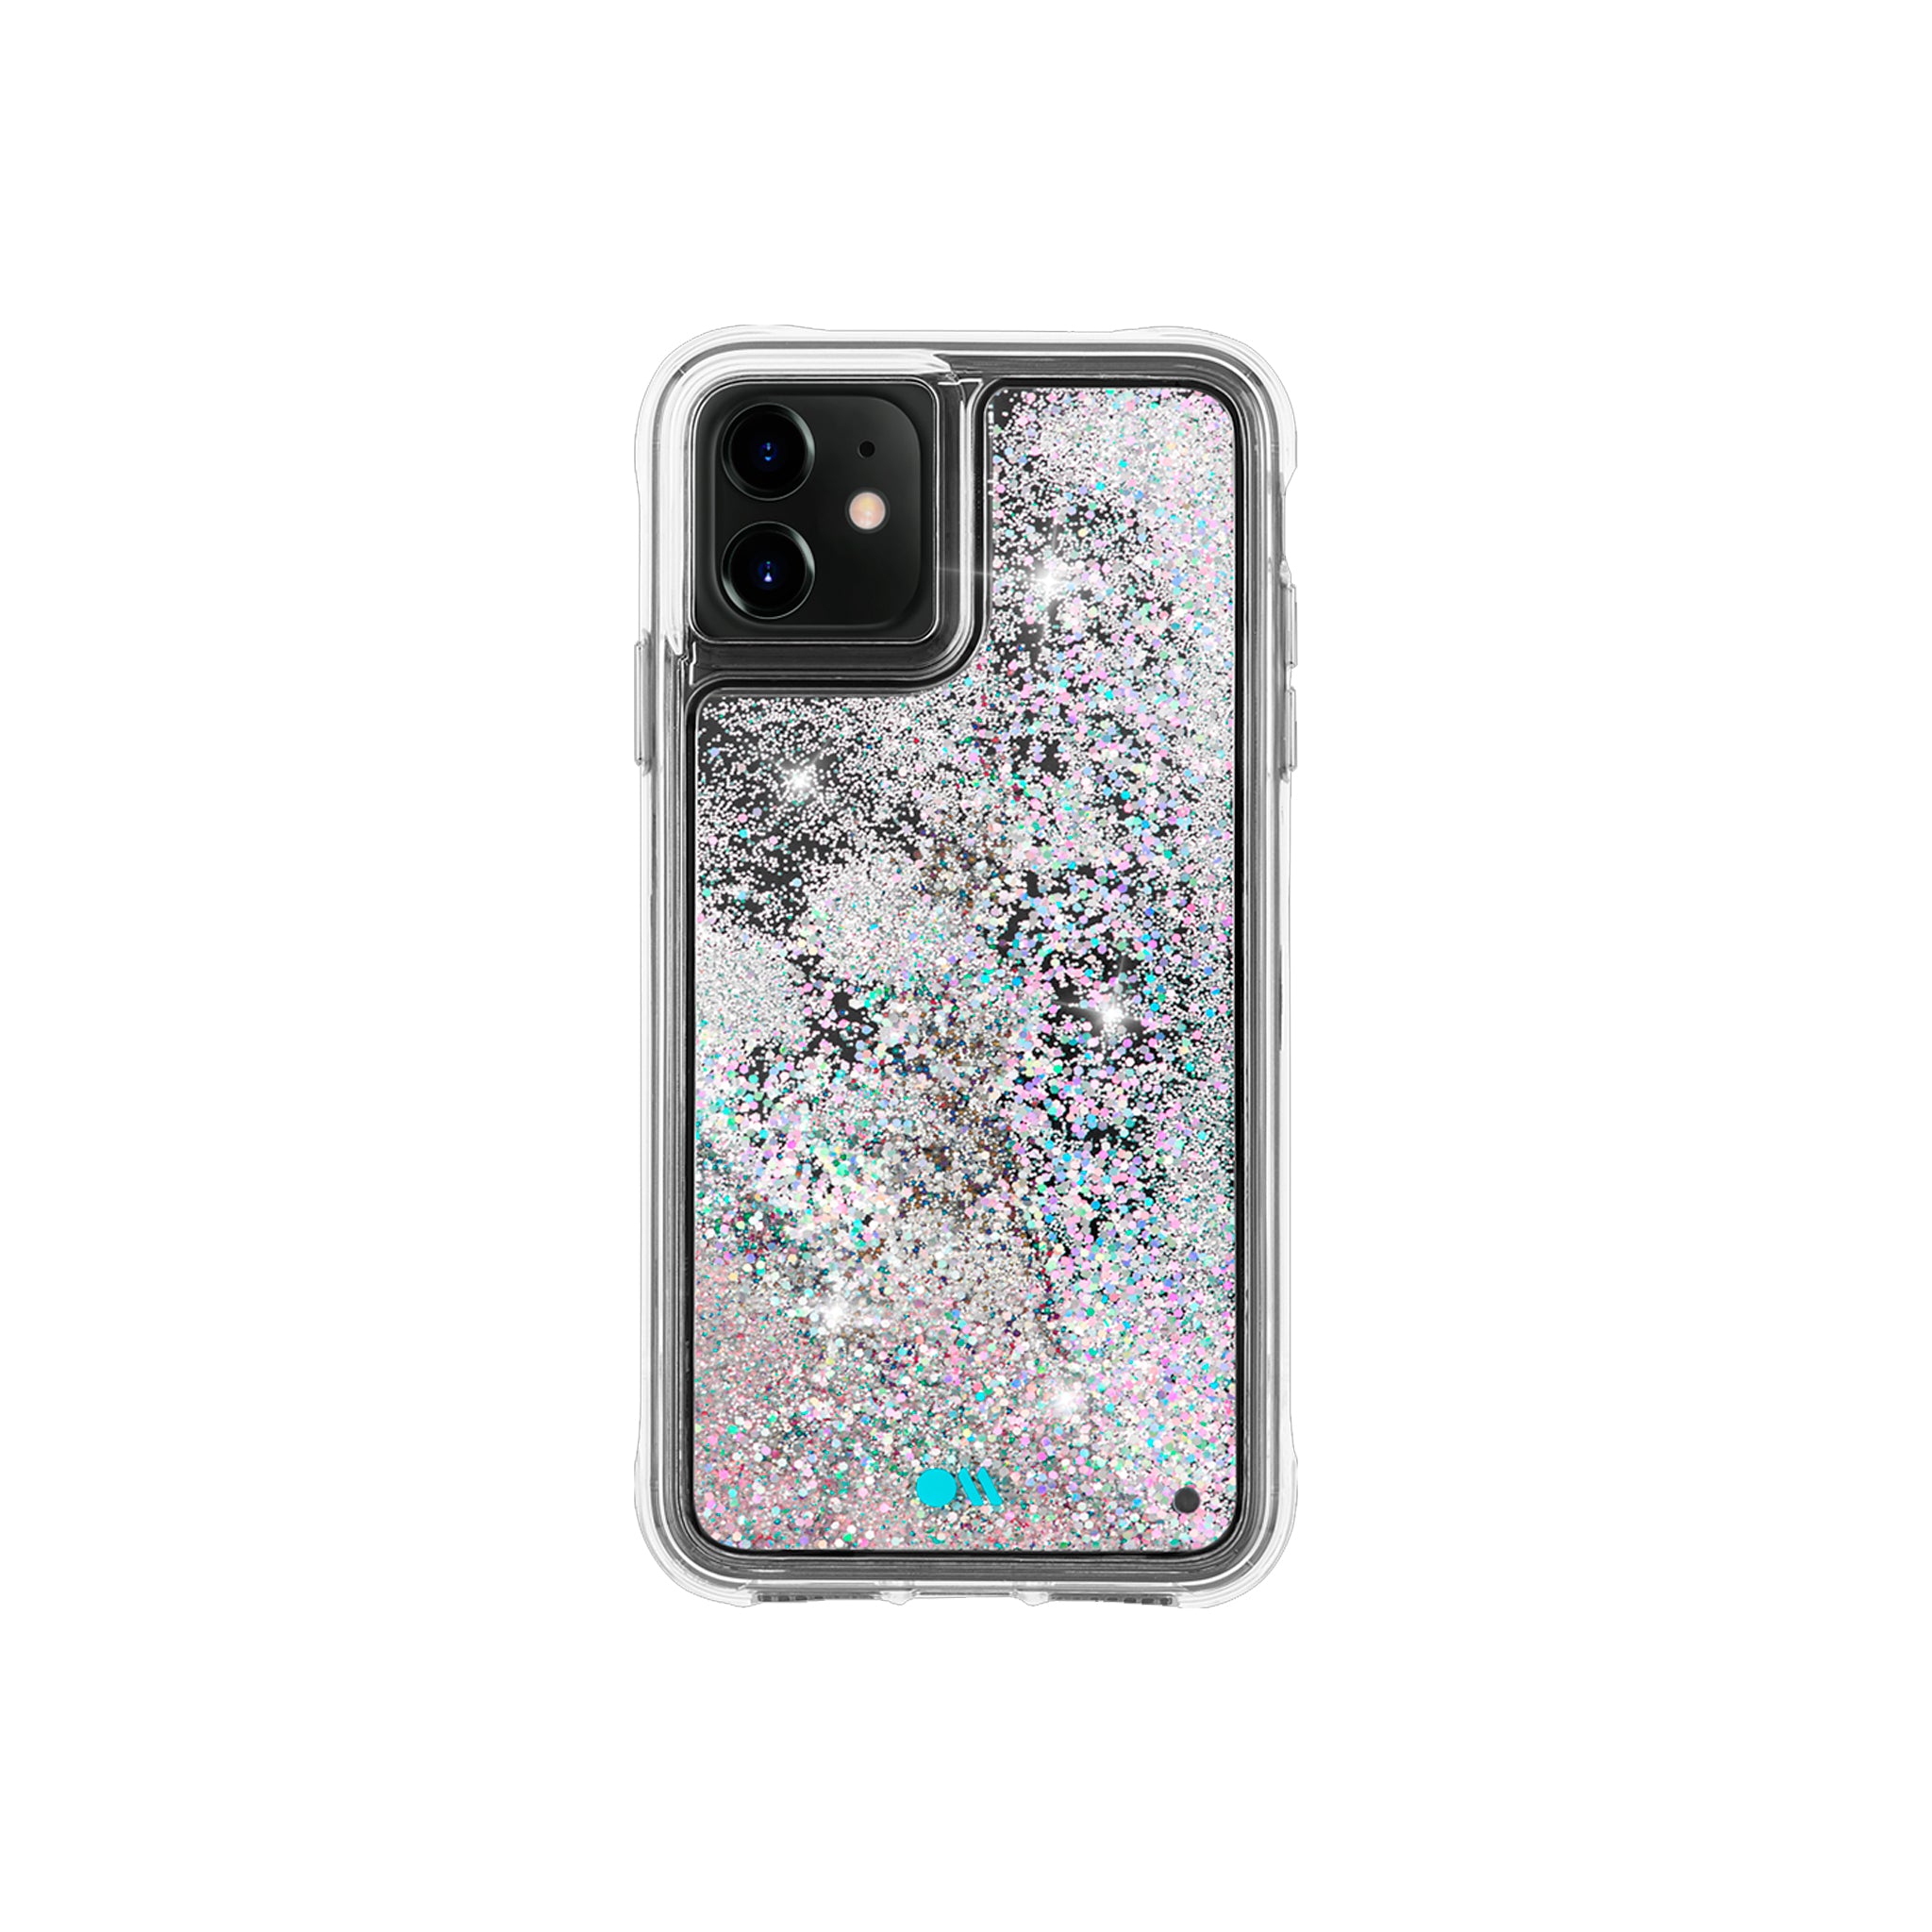 Case-mate - Waterfall Case For Apple iPhone 11 - Iridescent